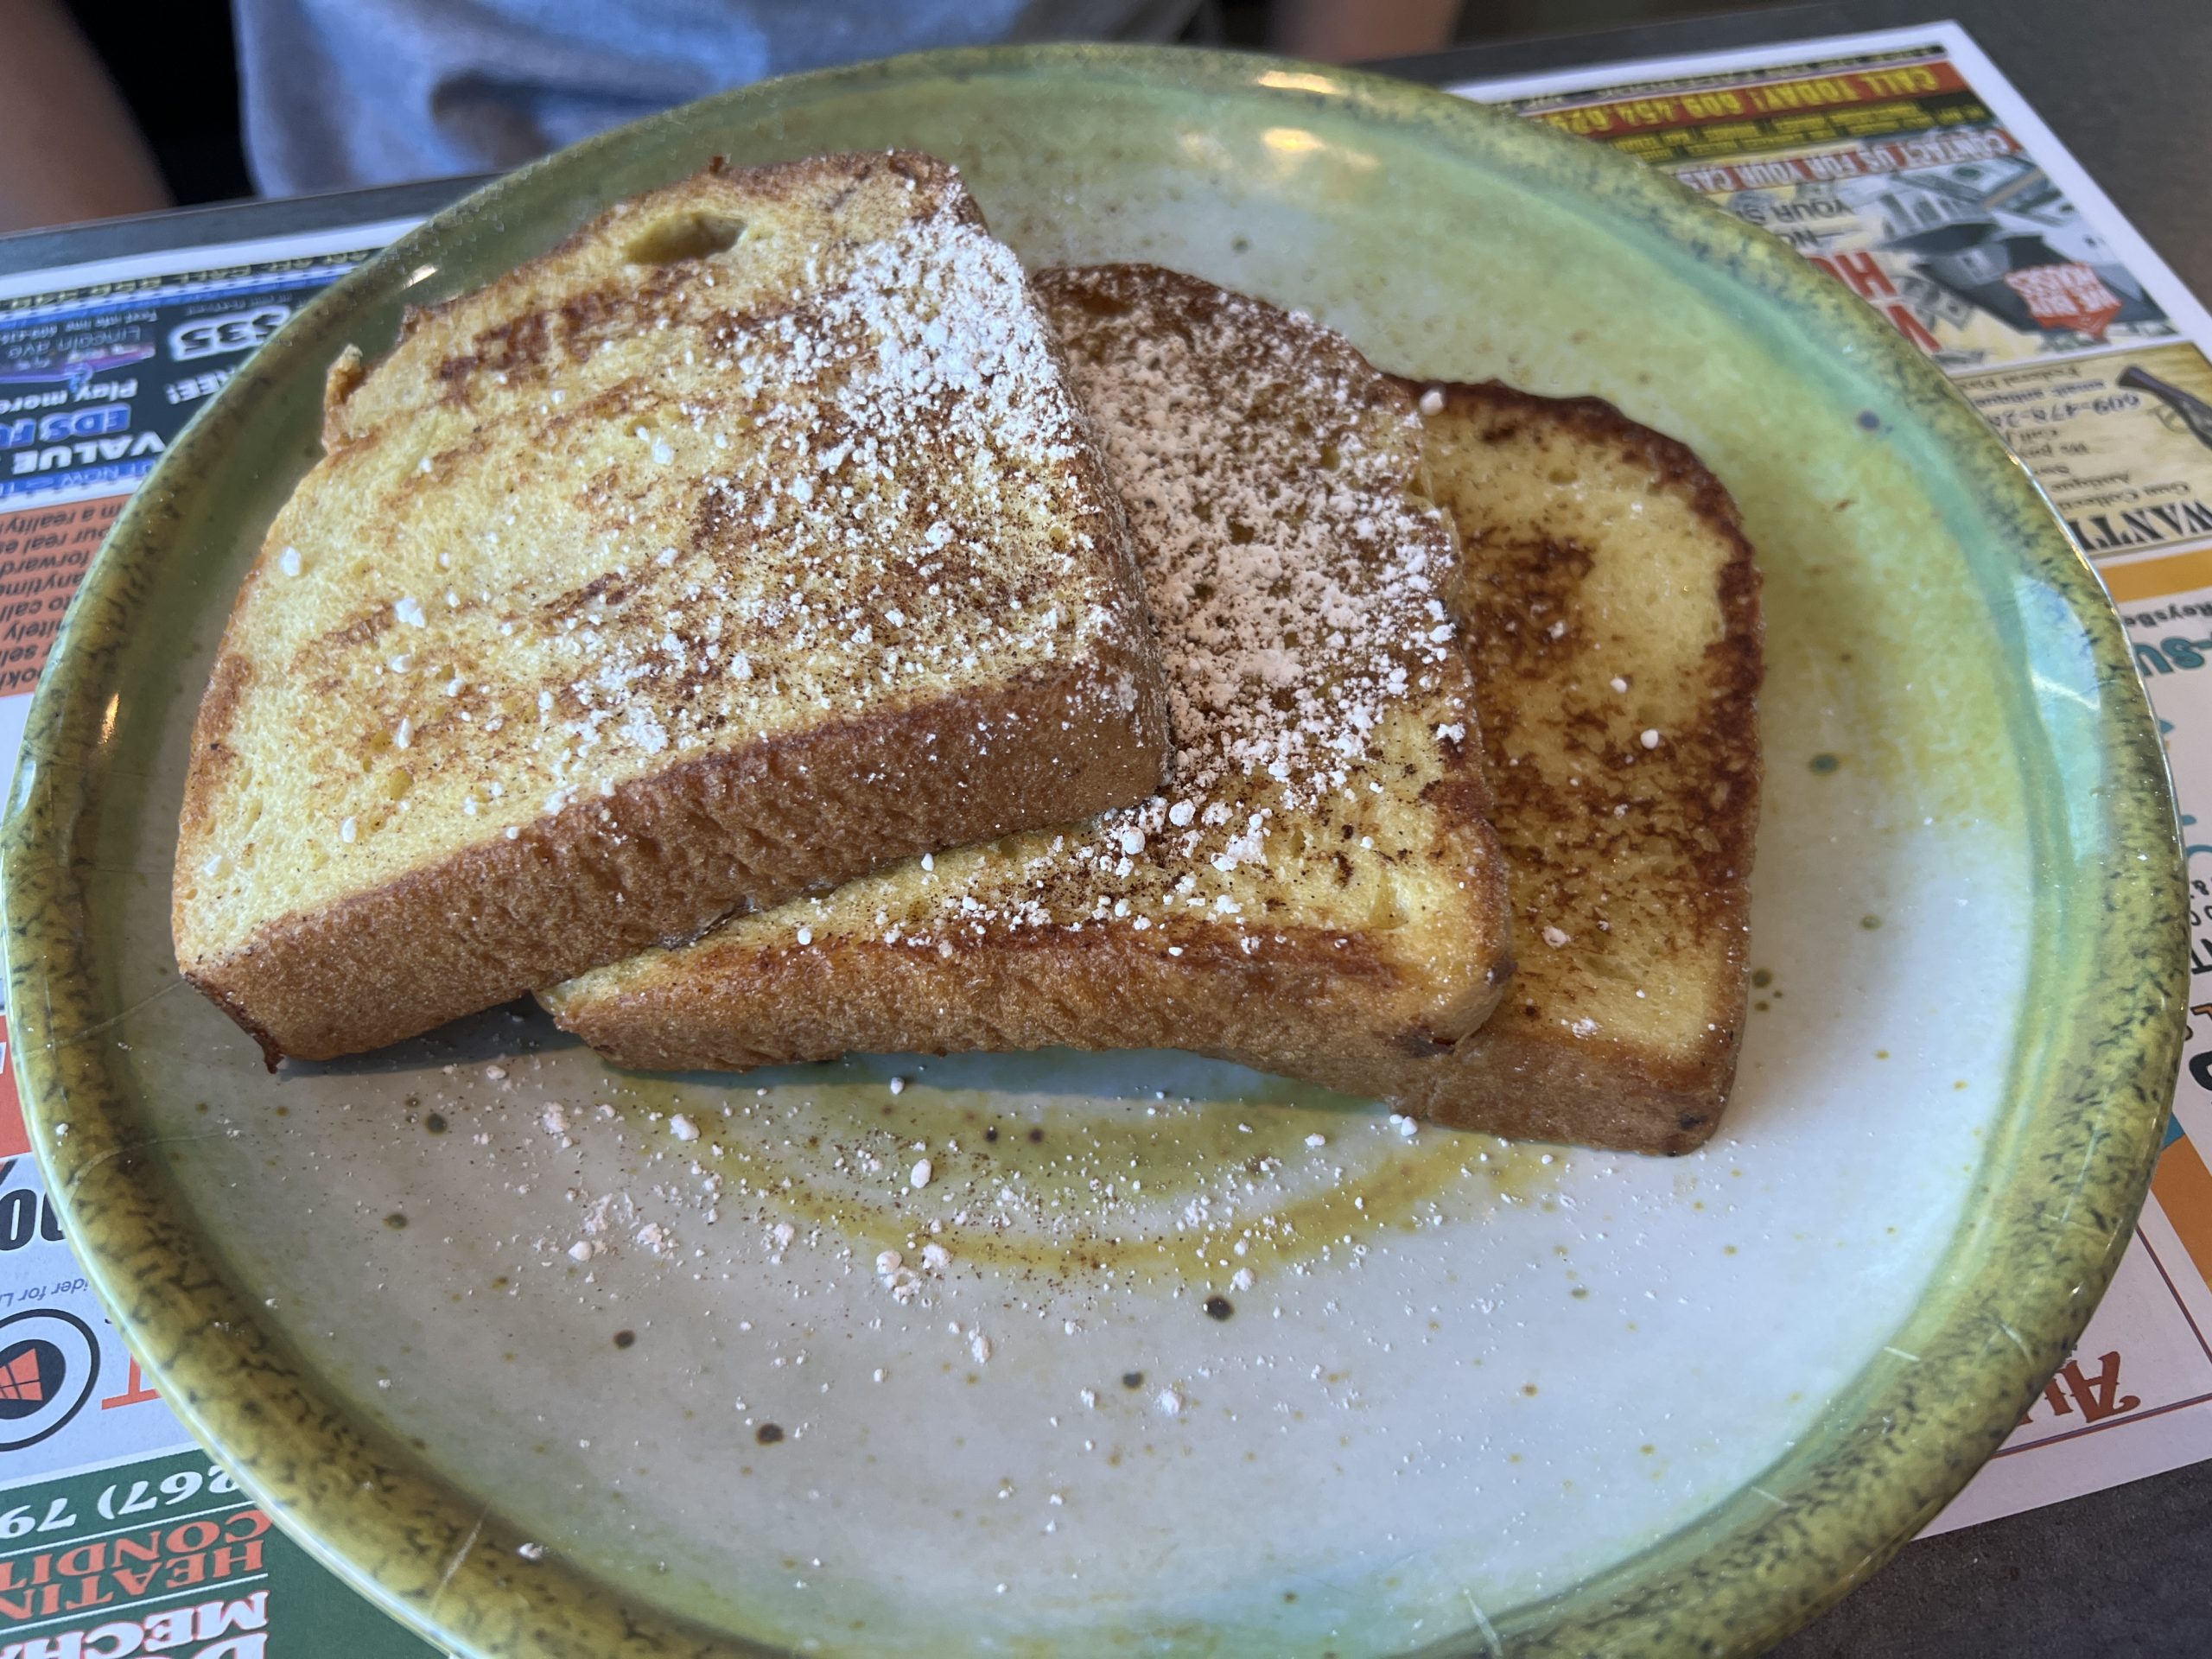 Marvis Pancake House in North Wildwood french toast